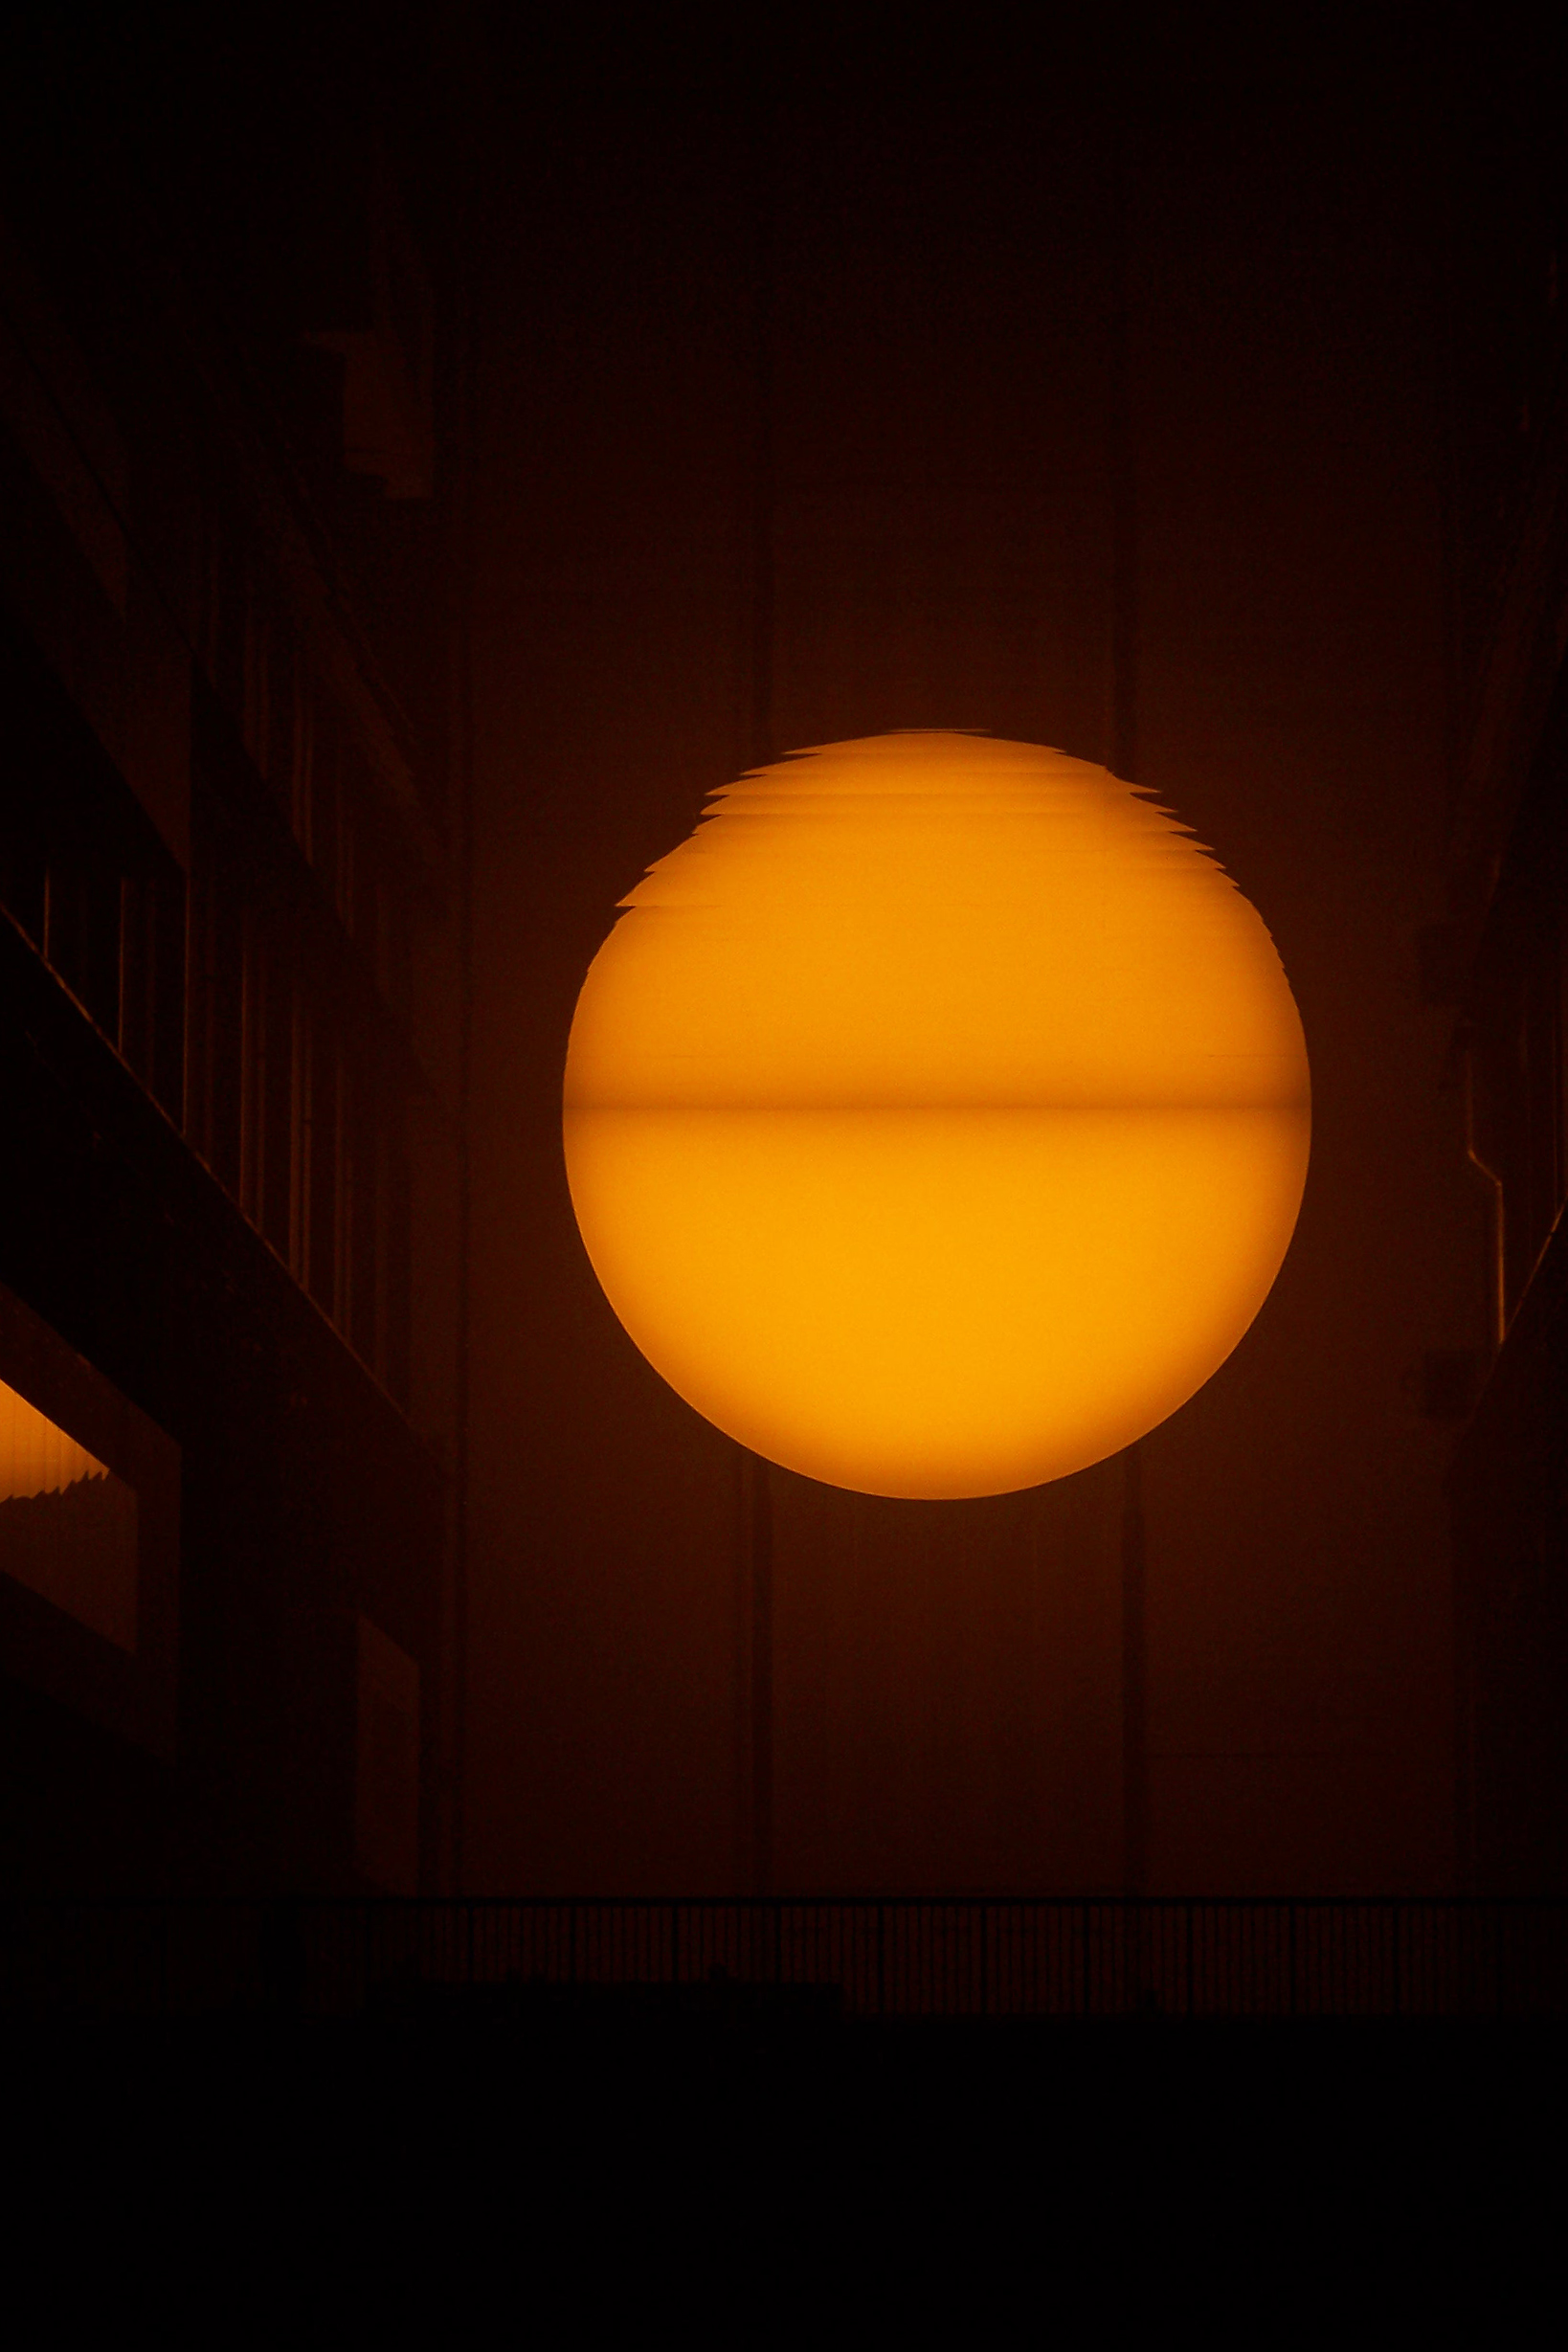 2004_01-08_Olafur-Eliasson_The-Weather-Project-[Tate-Modern]_6_Photograph_James-Bulley.jpg